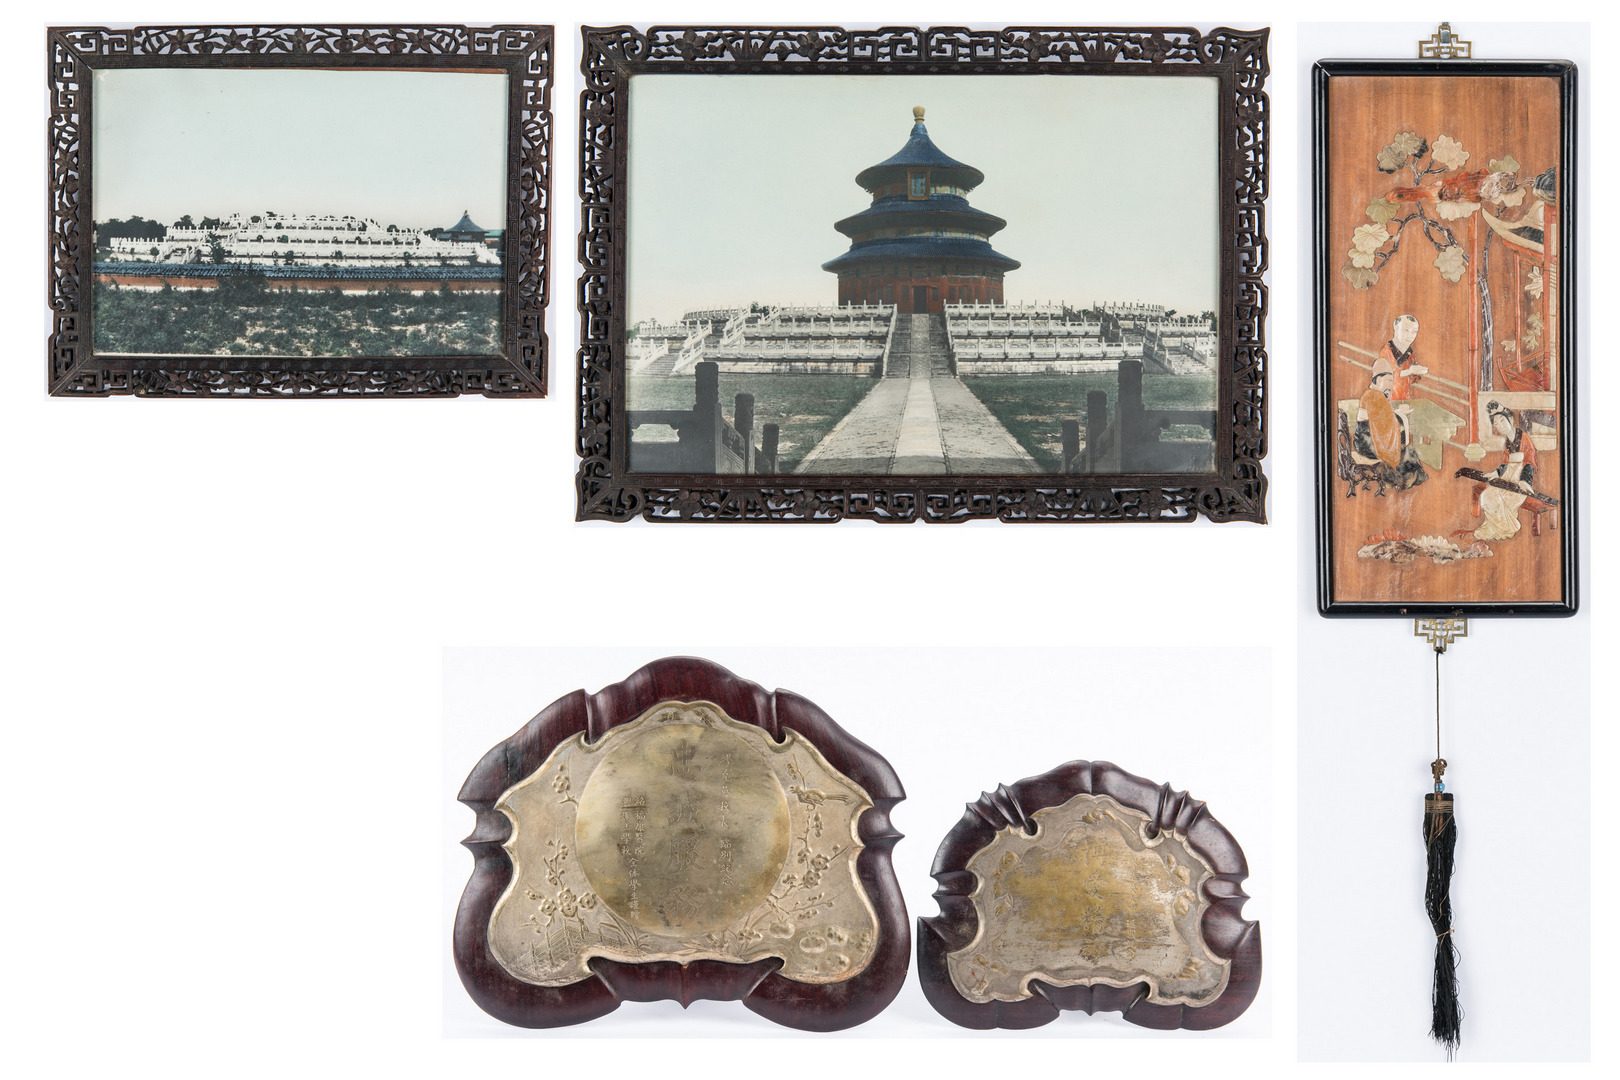 Lot 8: 2 Framed Chinese Photos, 1 Hardstone Plaque & 2 Presentation Plaques